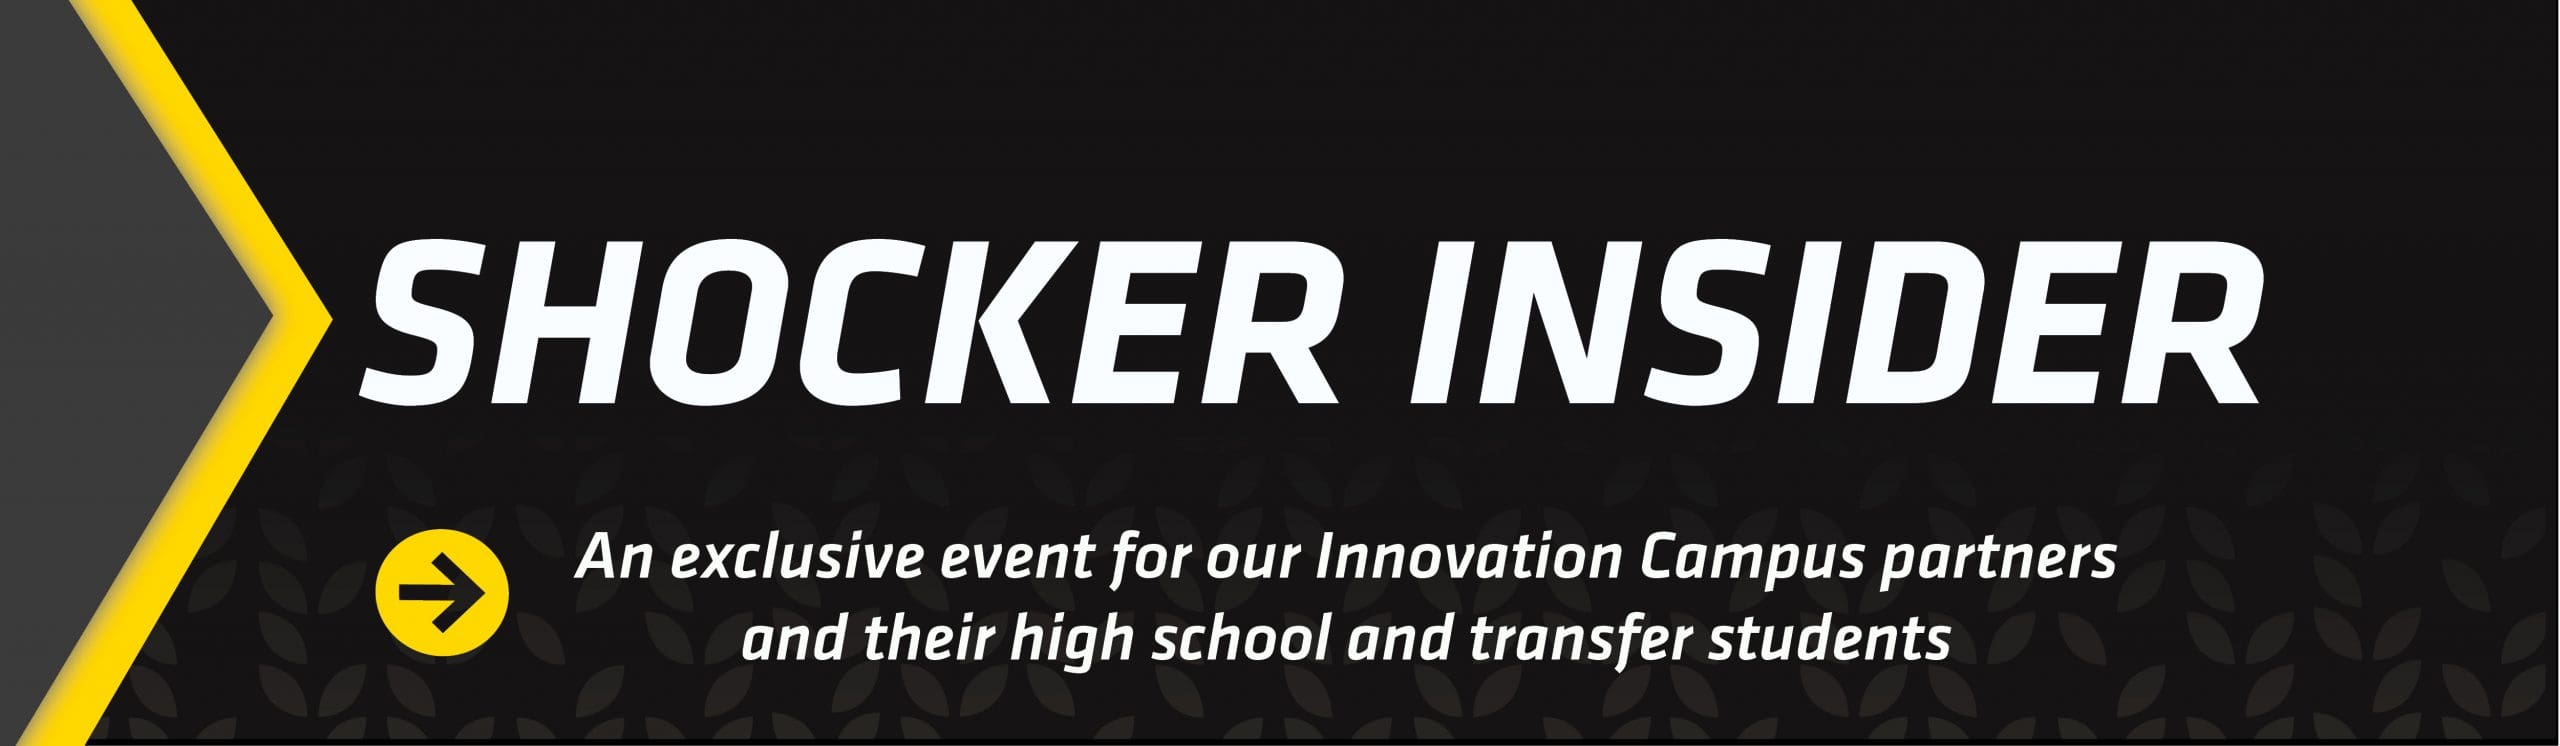 Shocker Insider: An exclusive event for our Innovation Campus partners and their high school and transfer students